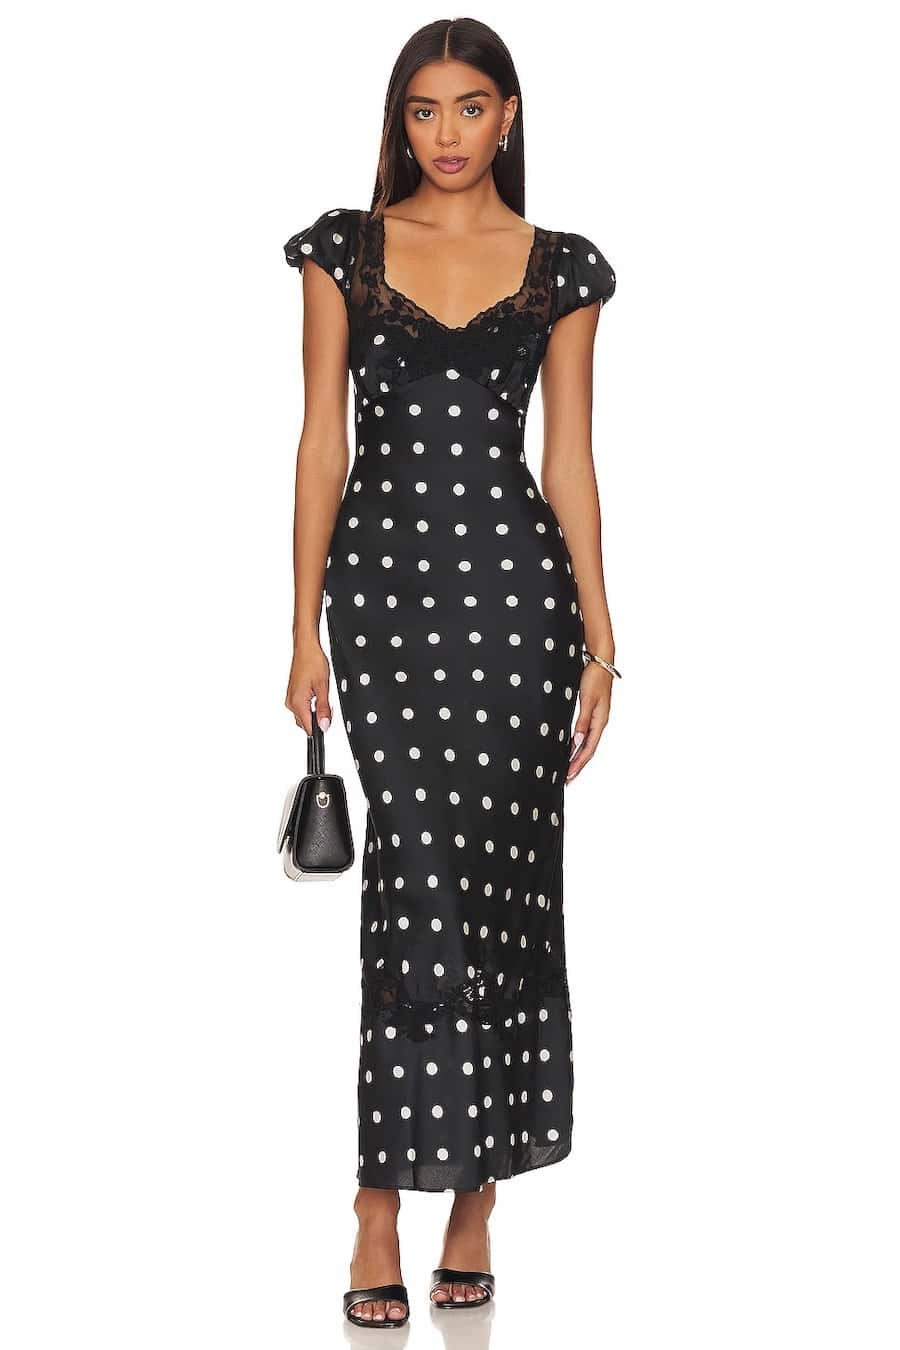 A woman wearing a black maxi dress with white polka dots with cap sleeves and a lace detail bodice